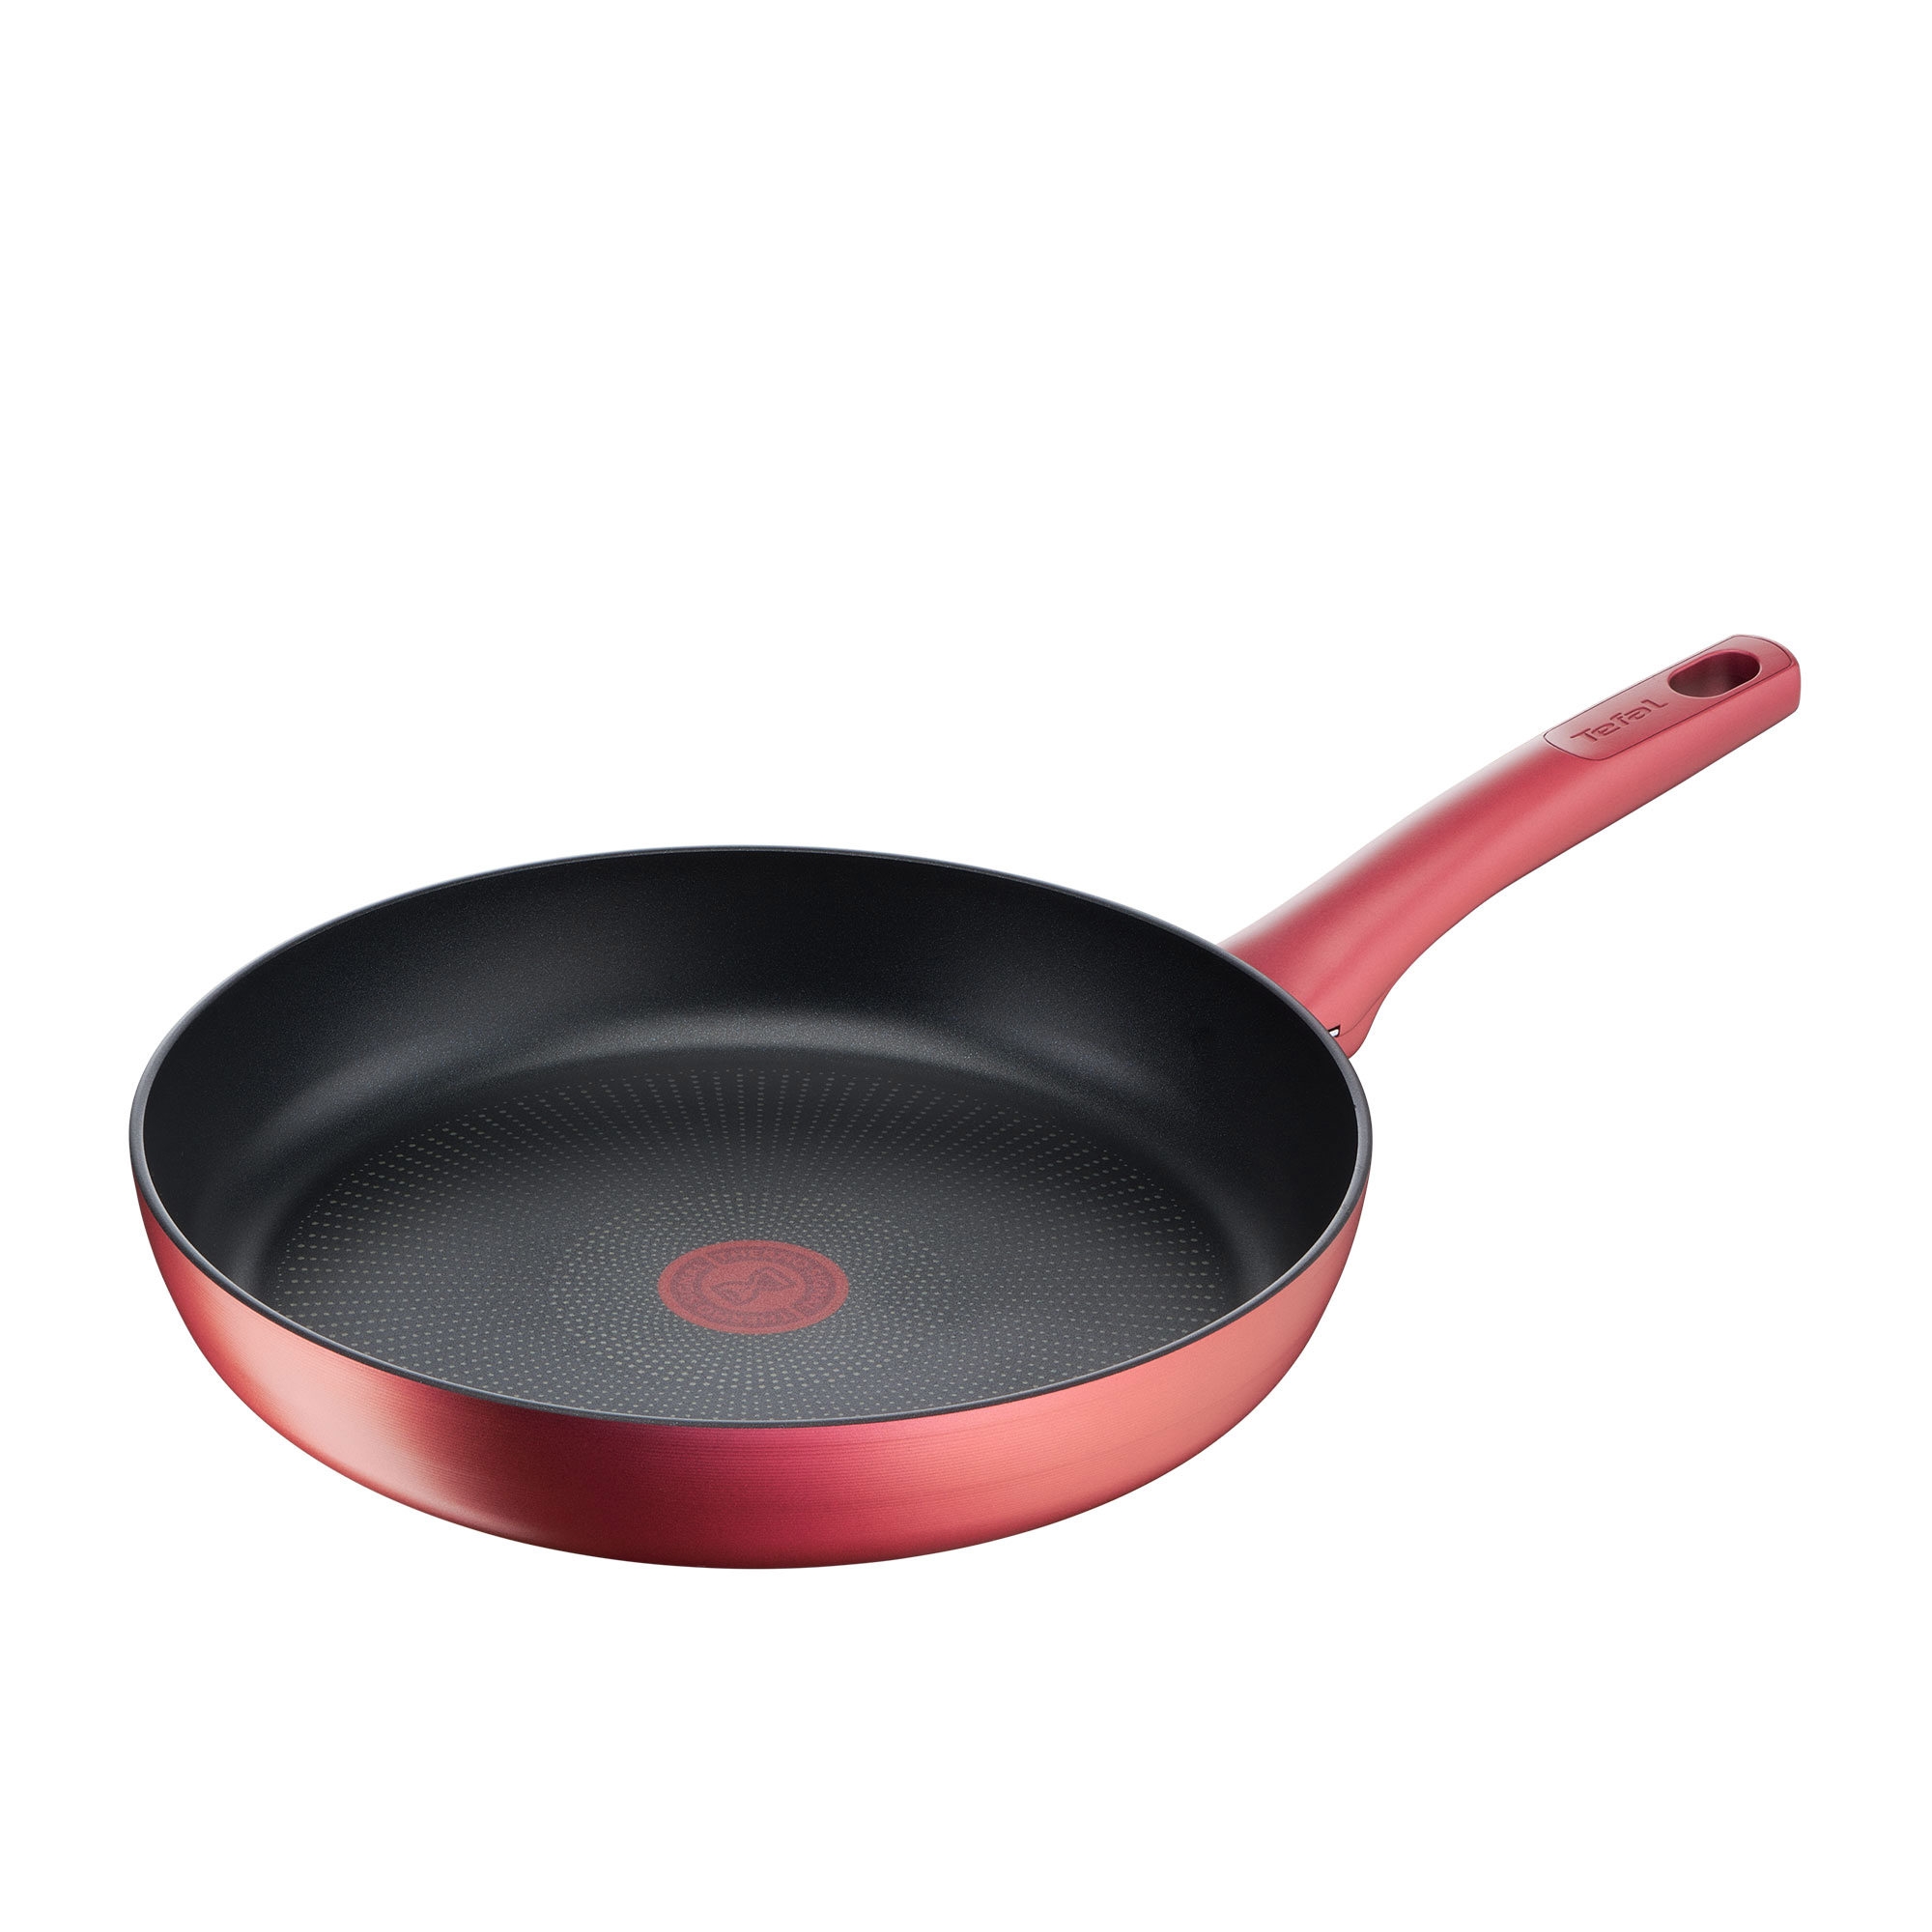 Tefal Perfect Cook Induction Non Stick Frypan 30cm Image 1